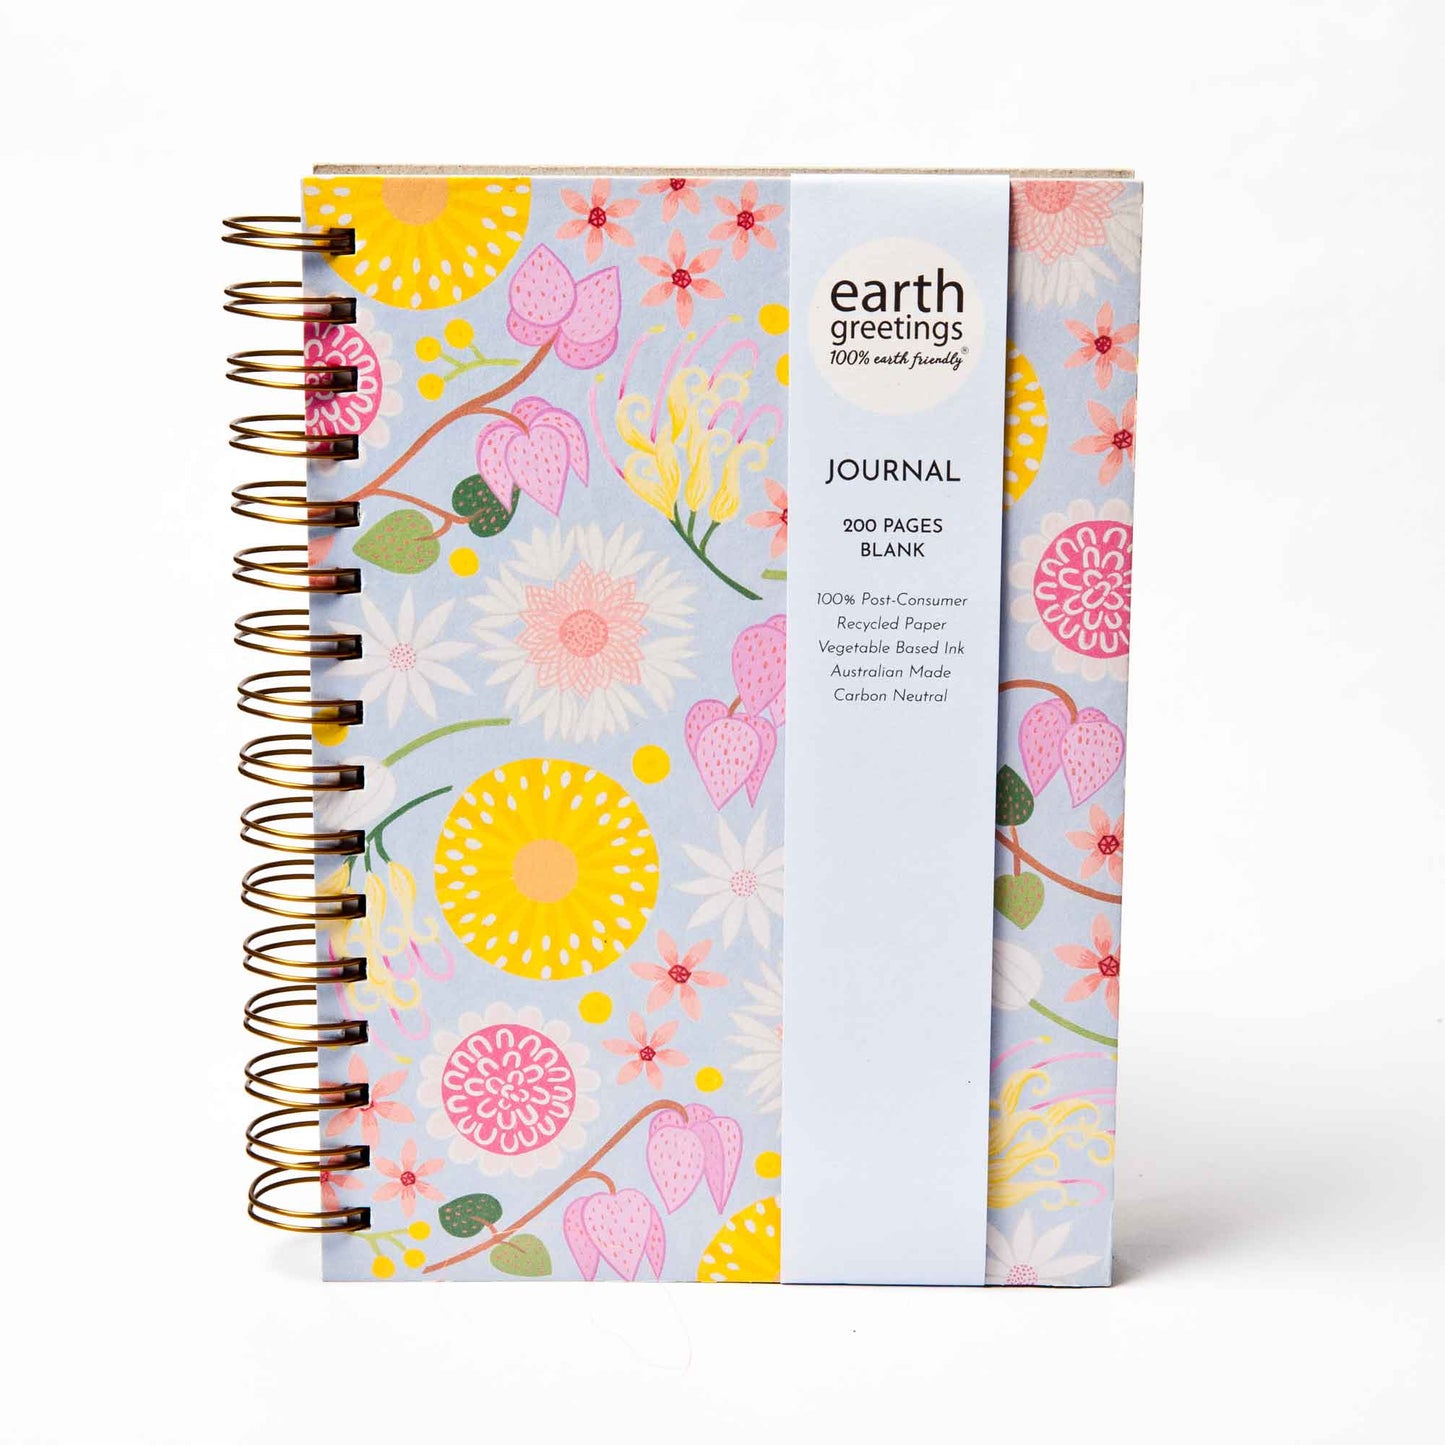 Earth Greetings Nature Inspired Journal with 100% Post-Consumer Recycled Paper. Diminish.